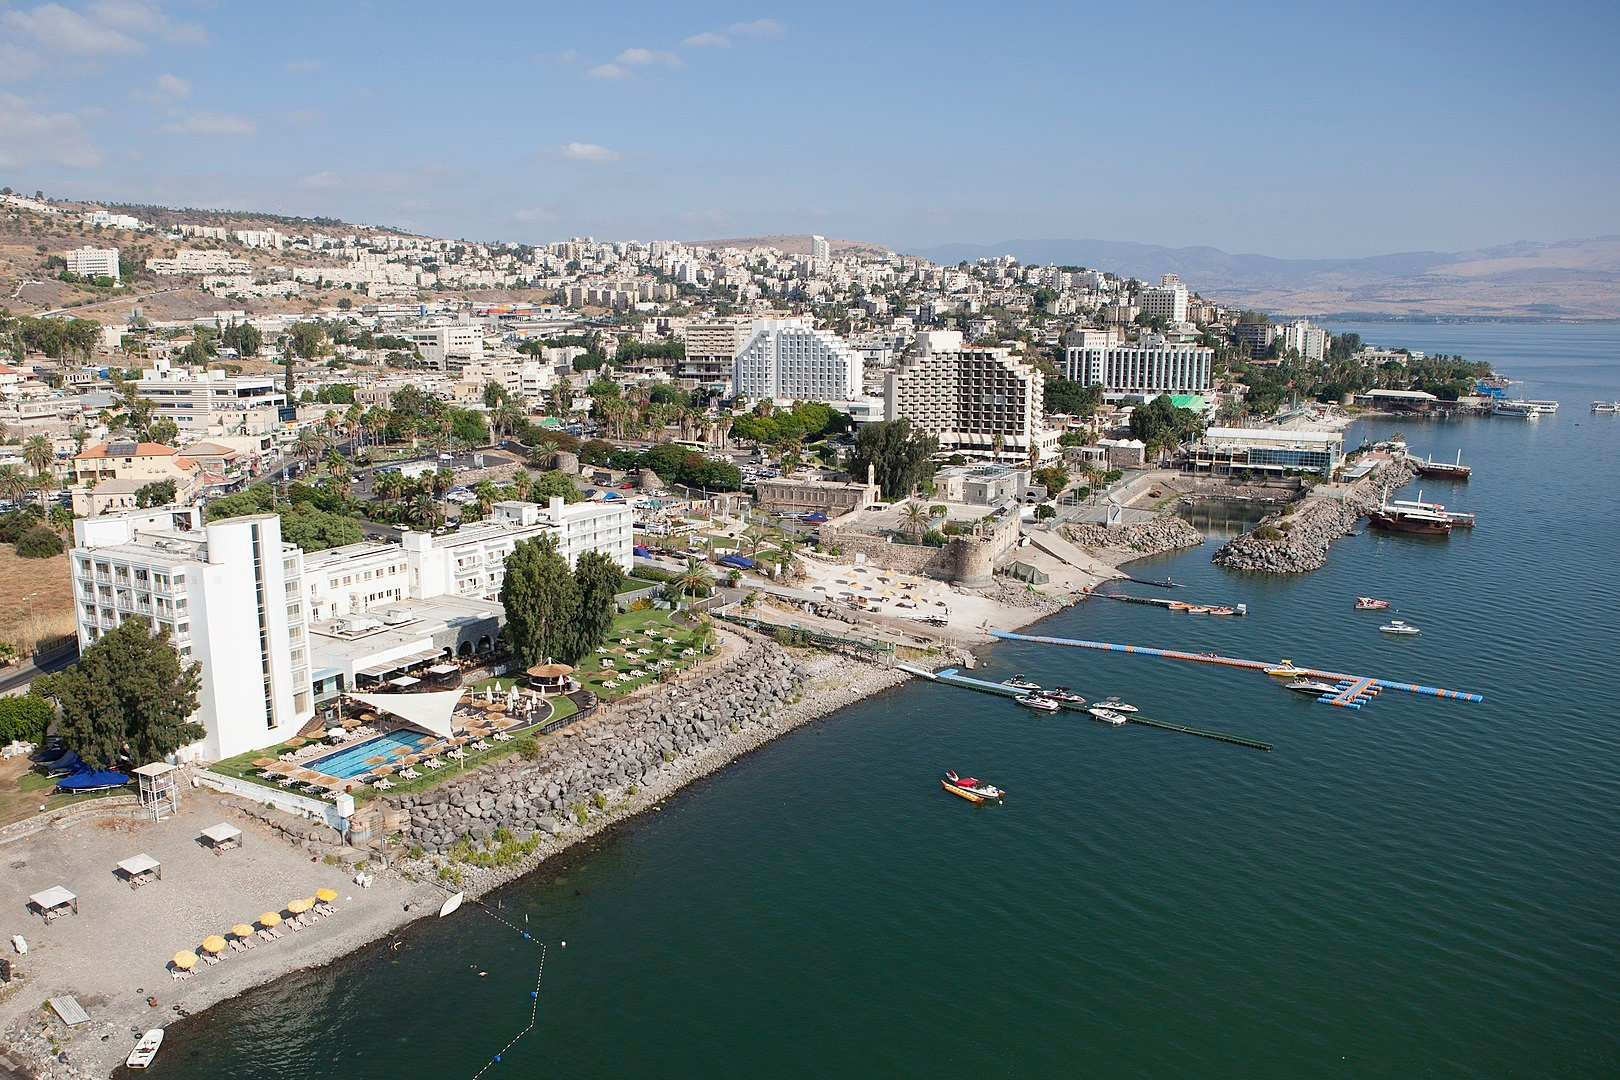 By israeltourism from Israel - TIBERIAS - GALILEE, CC BY-SA 2.0, https://commons.wikimedia.org/w/index.php?curid=37267075